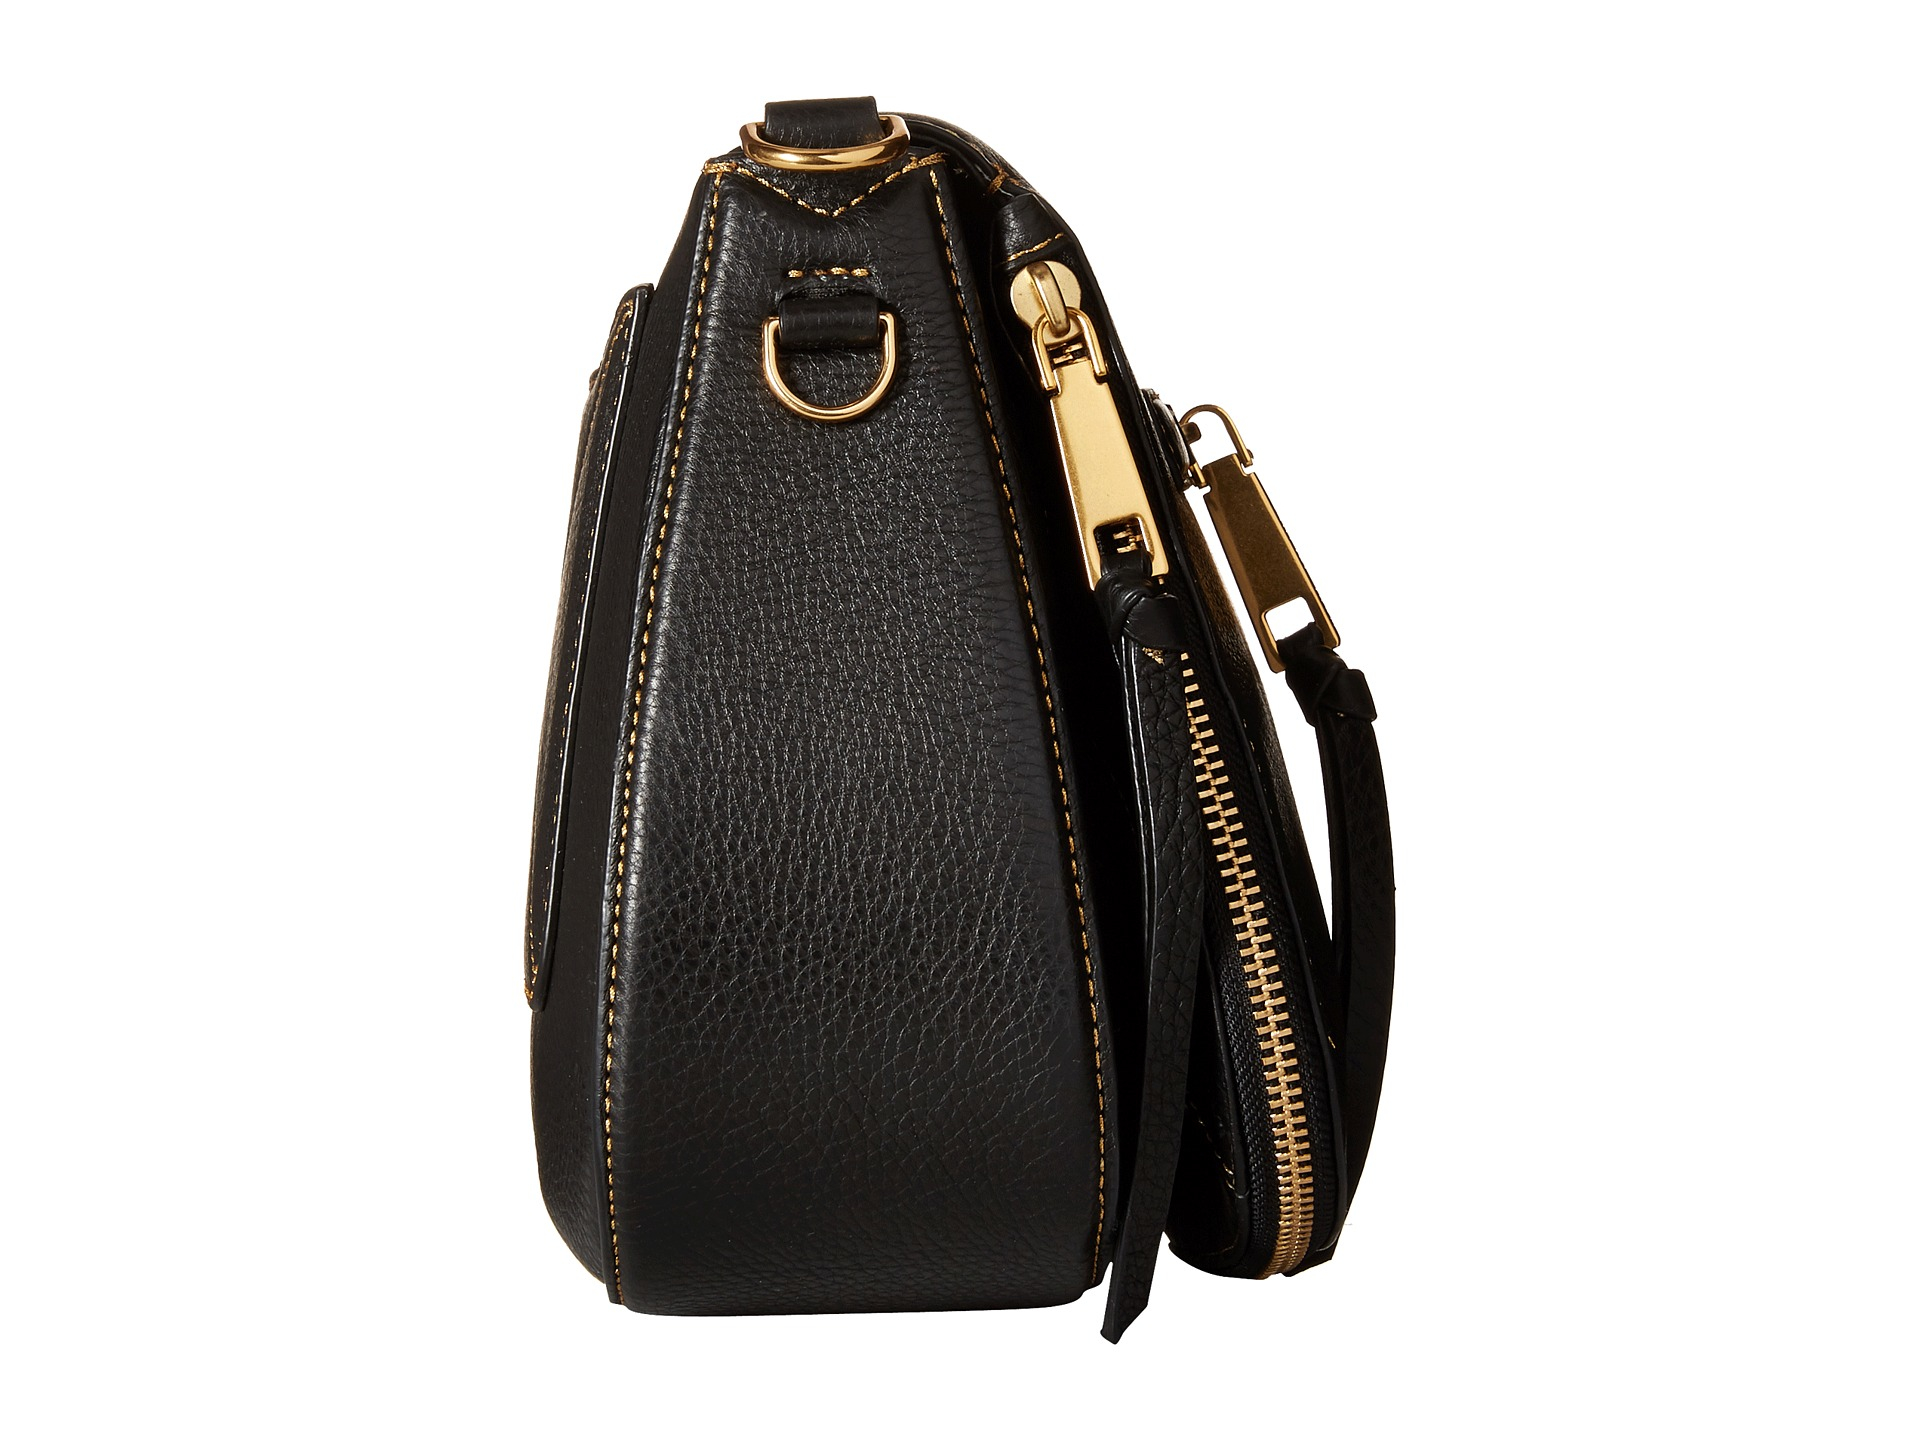 Lyst - Marc Jacobs Recruit With Guitar Strap Saddle Bag in Black